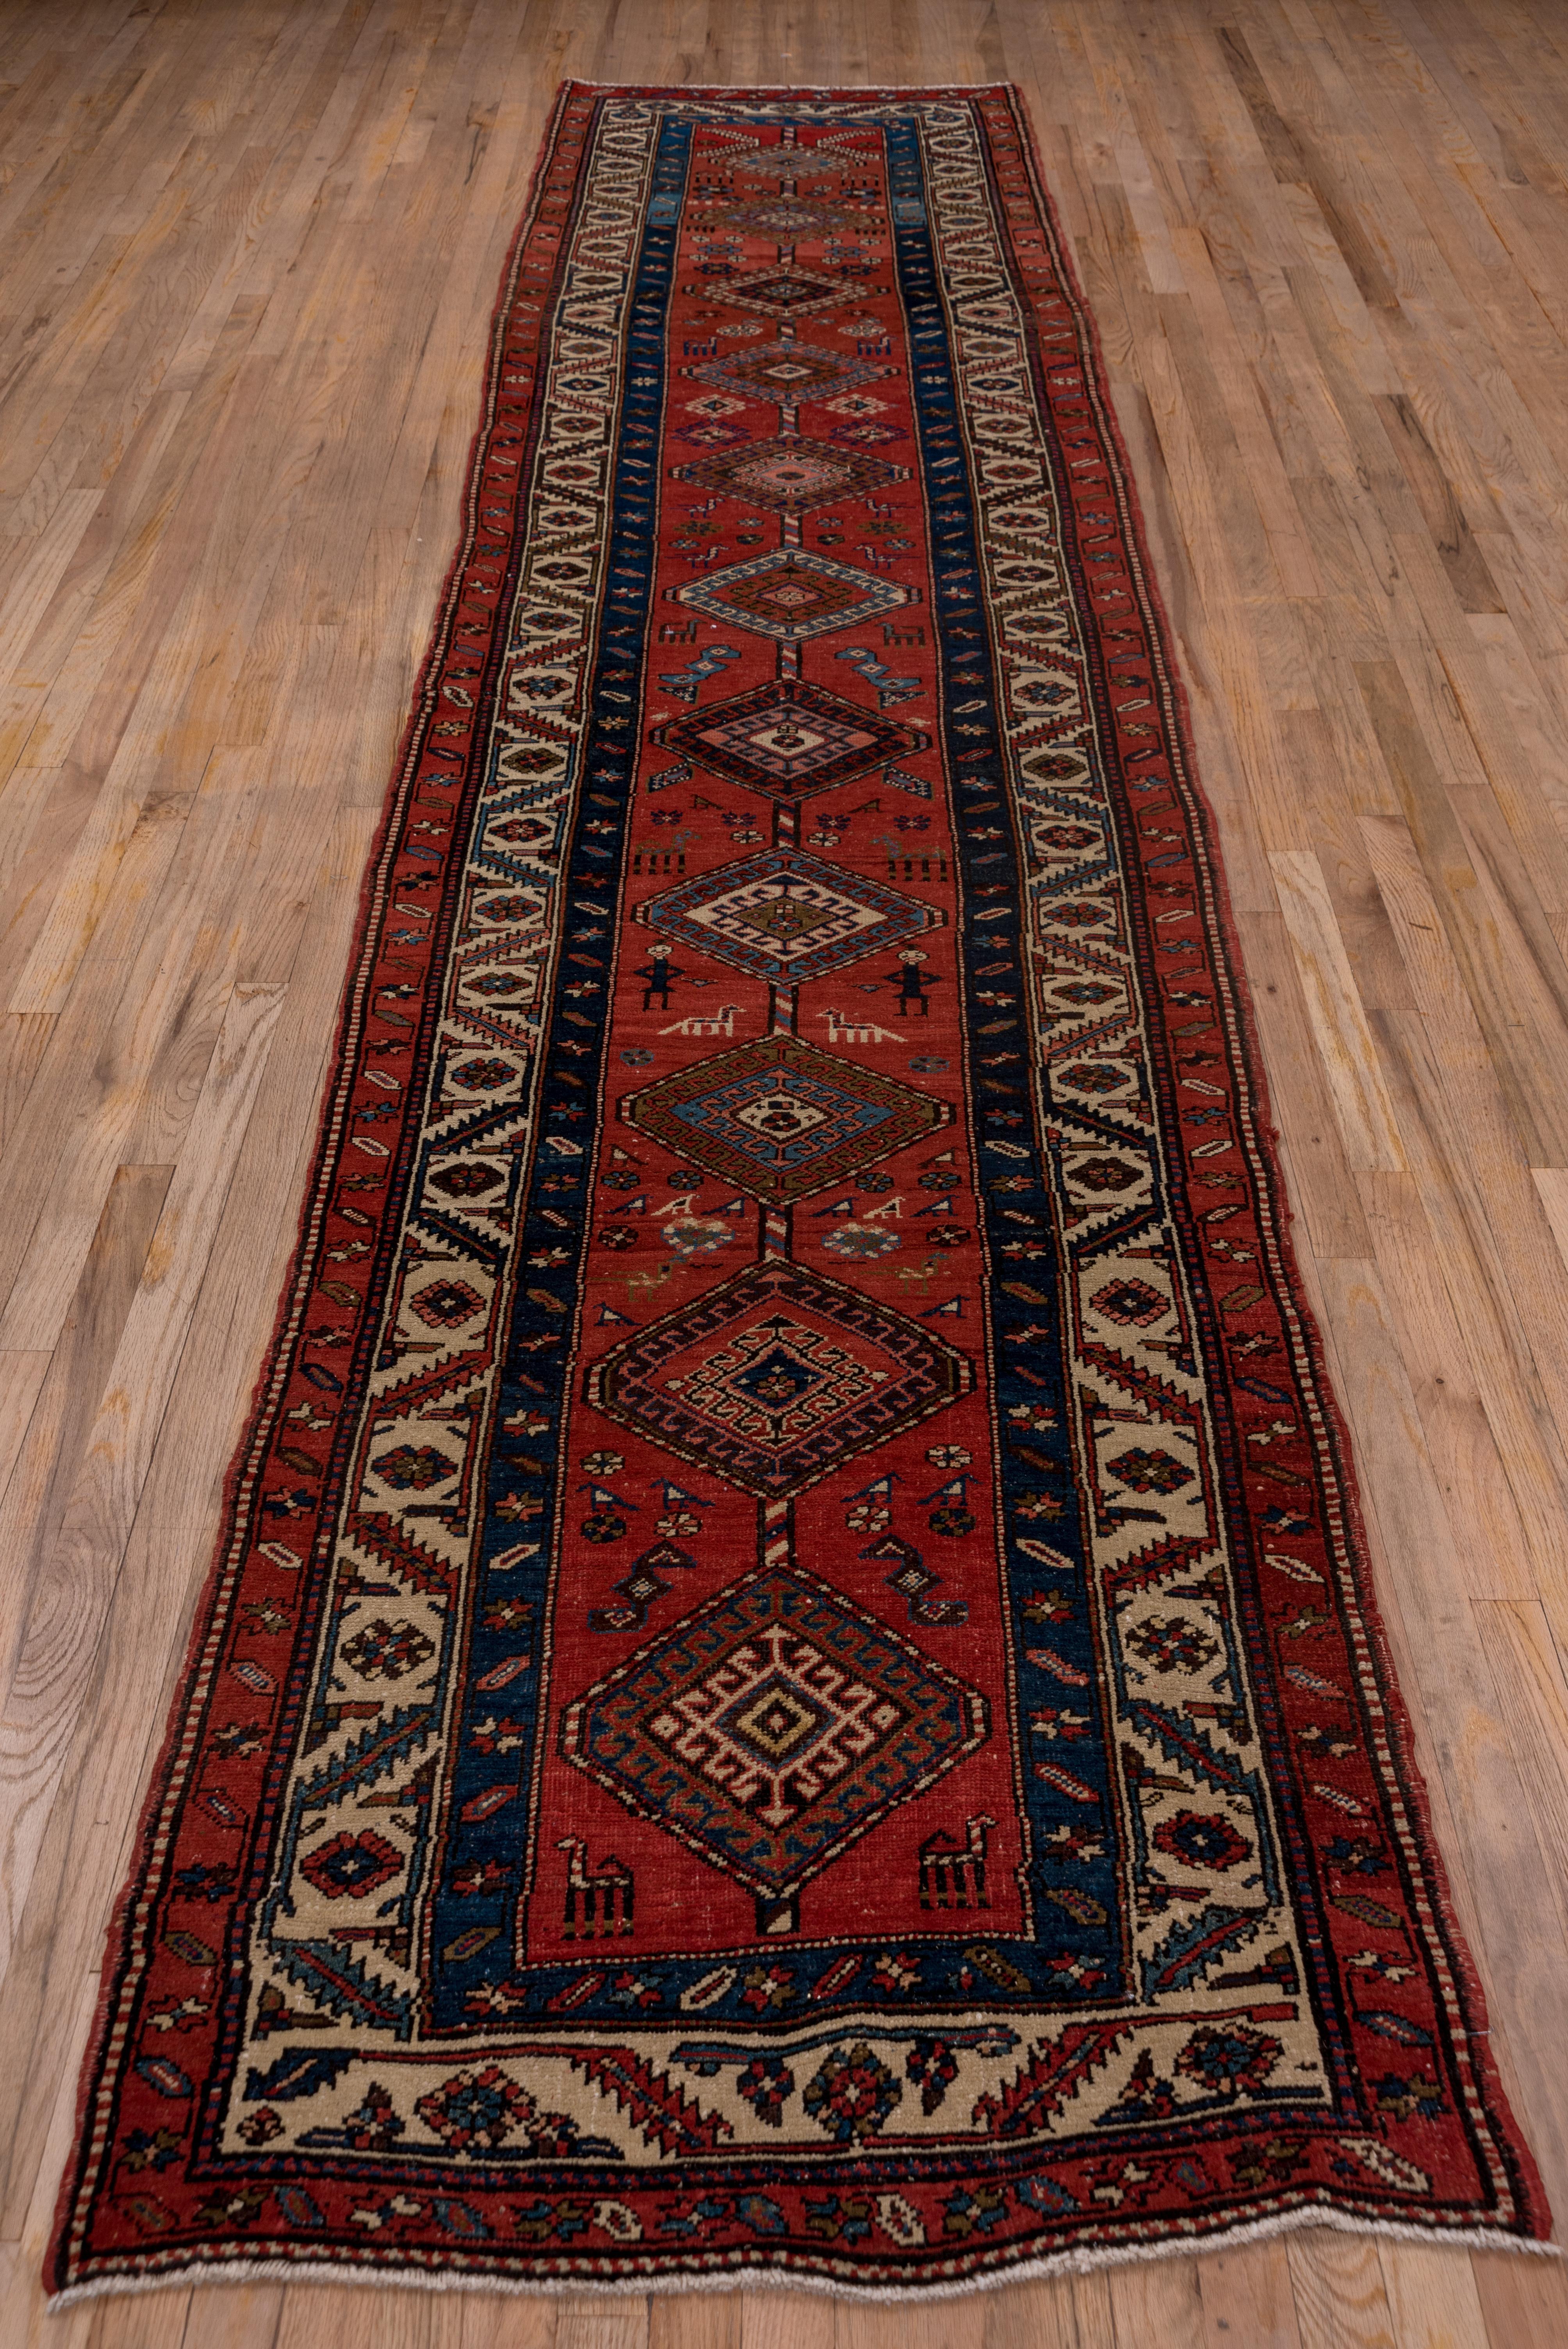 This very good condition NW Persian village runner displays a central pole medallion of 11 internally hooked hexagons flanked by birds, animals, human figures and rosettes on a ruby red field. The main ivory border displays the classic slanted,